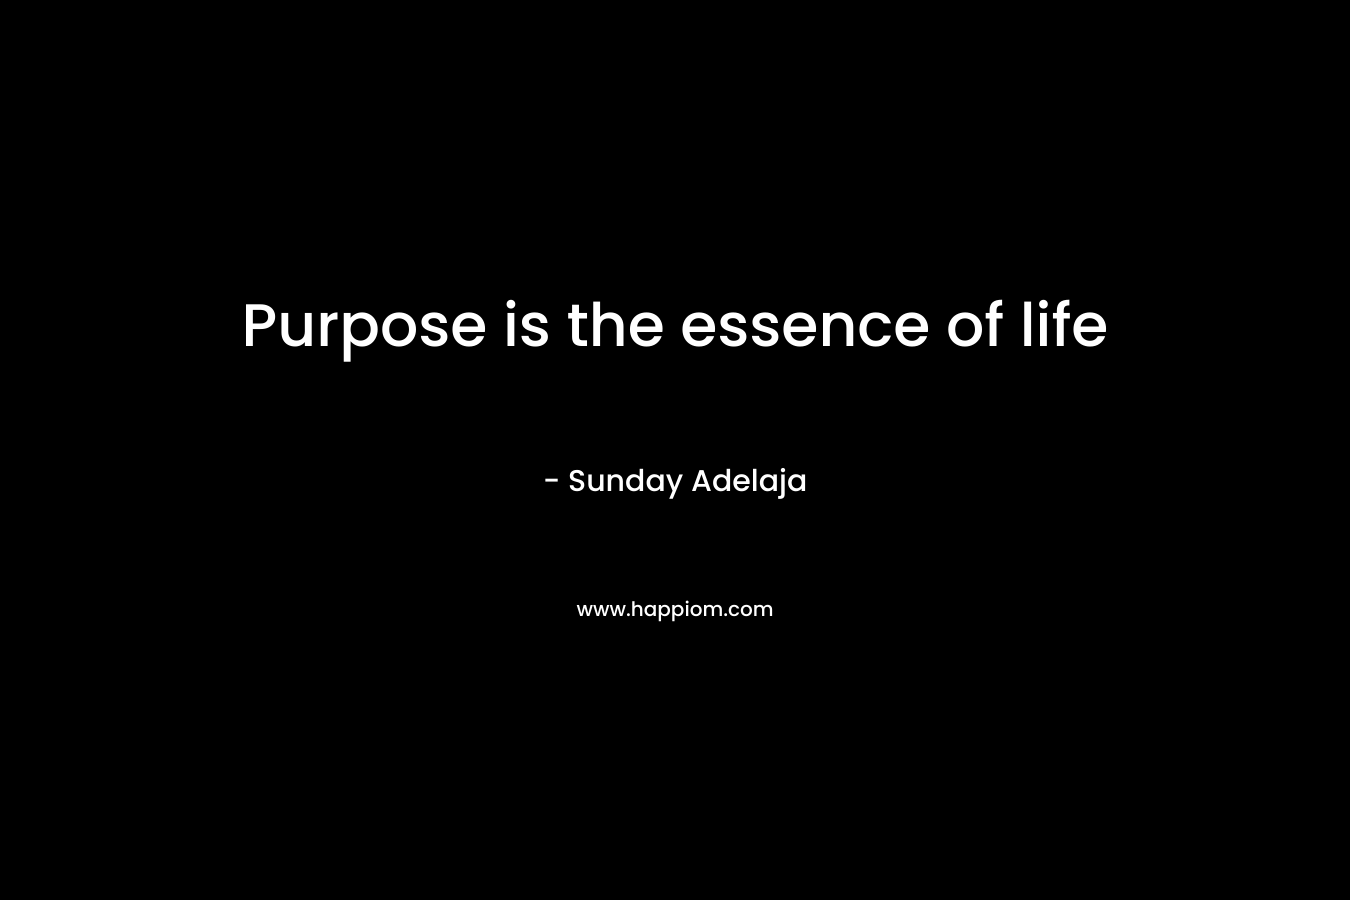 Purpose is the essence of life